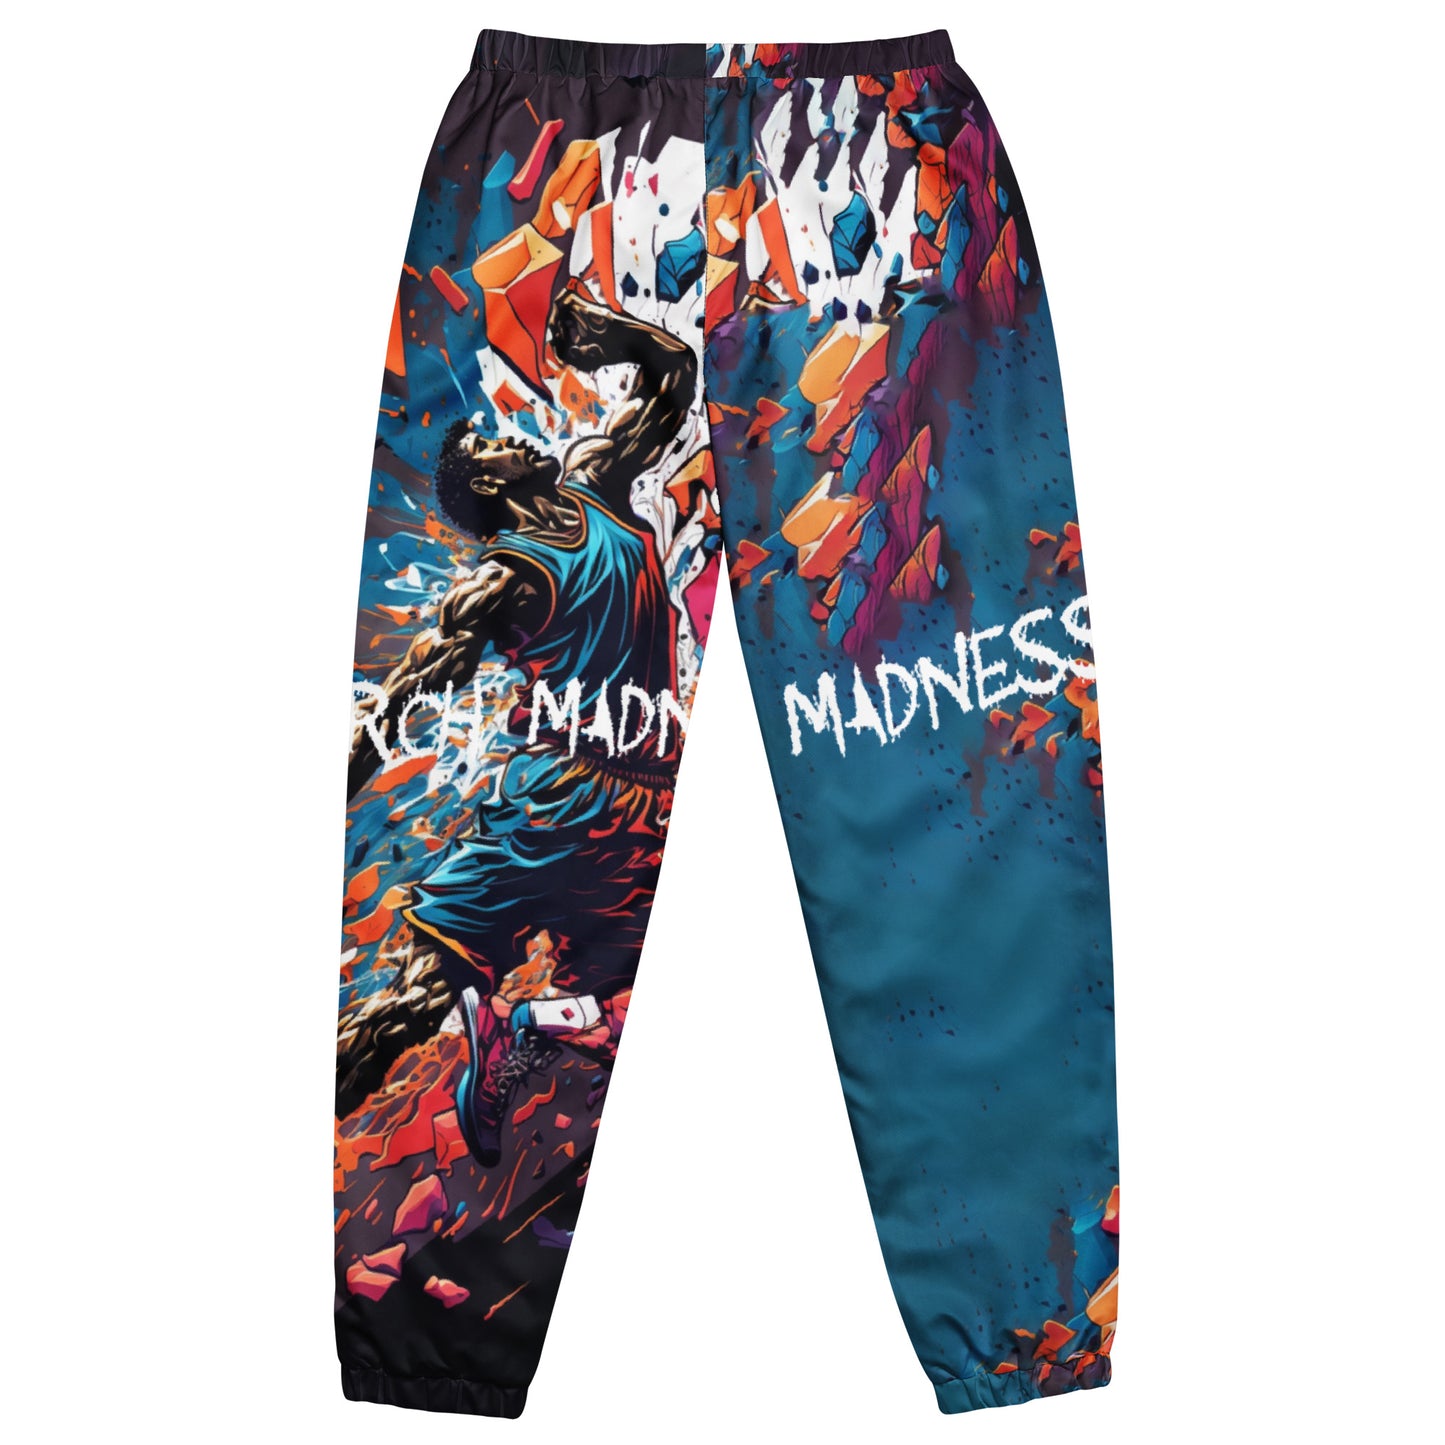 March Mad Ness - Unisex track pants